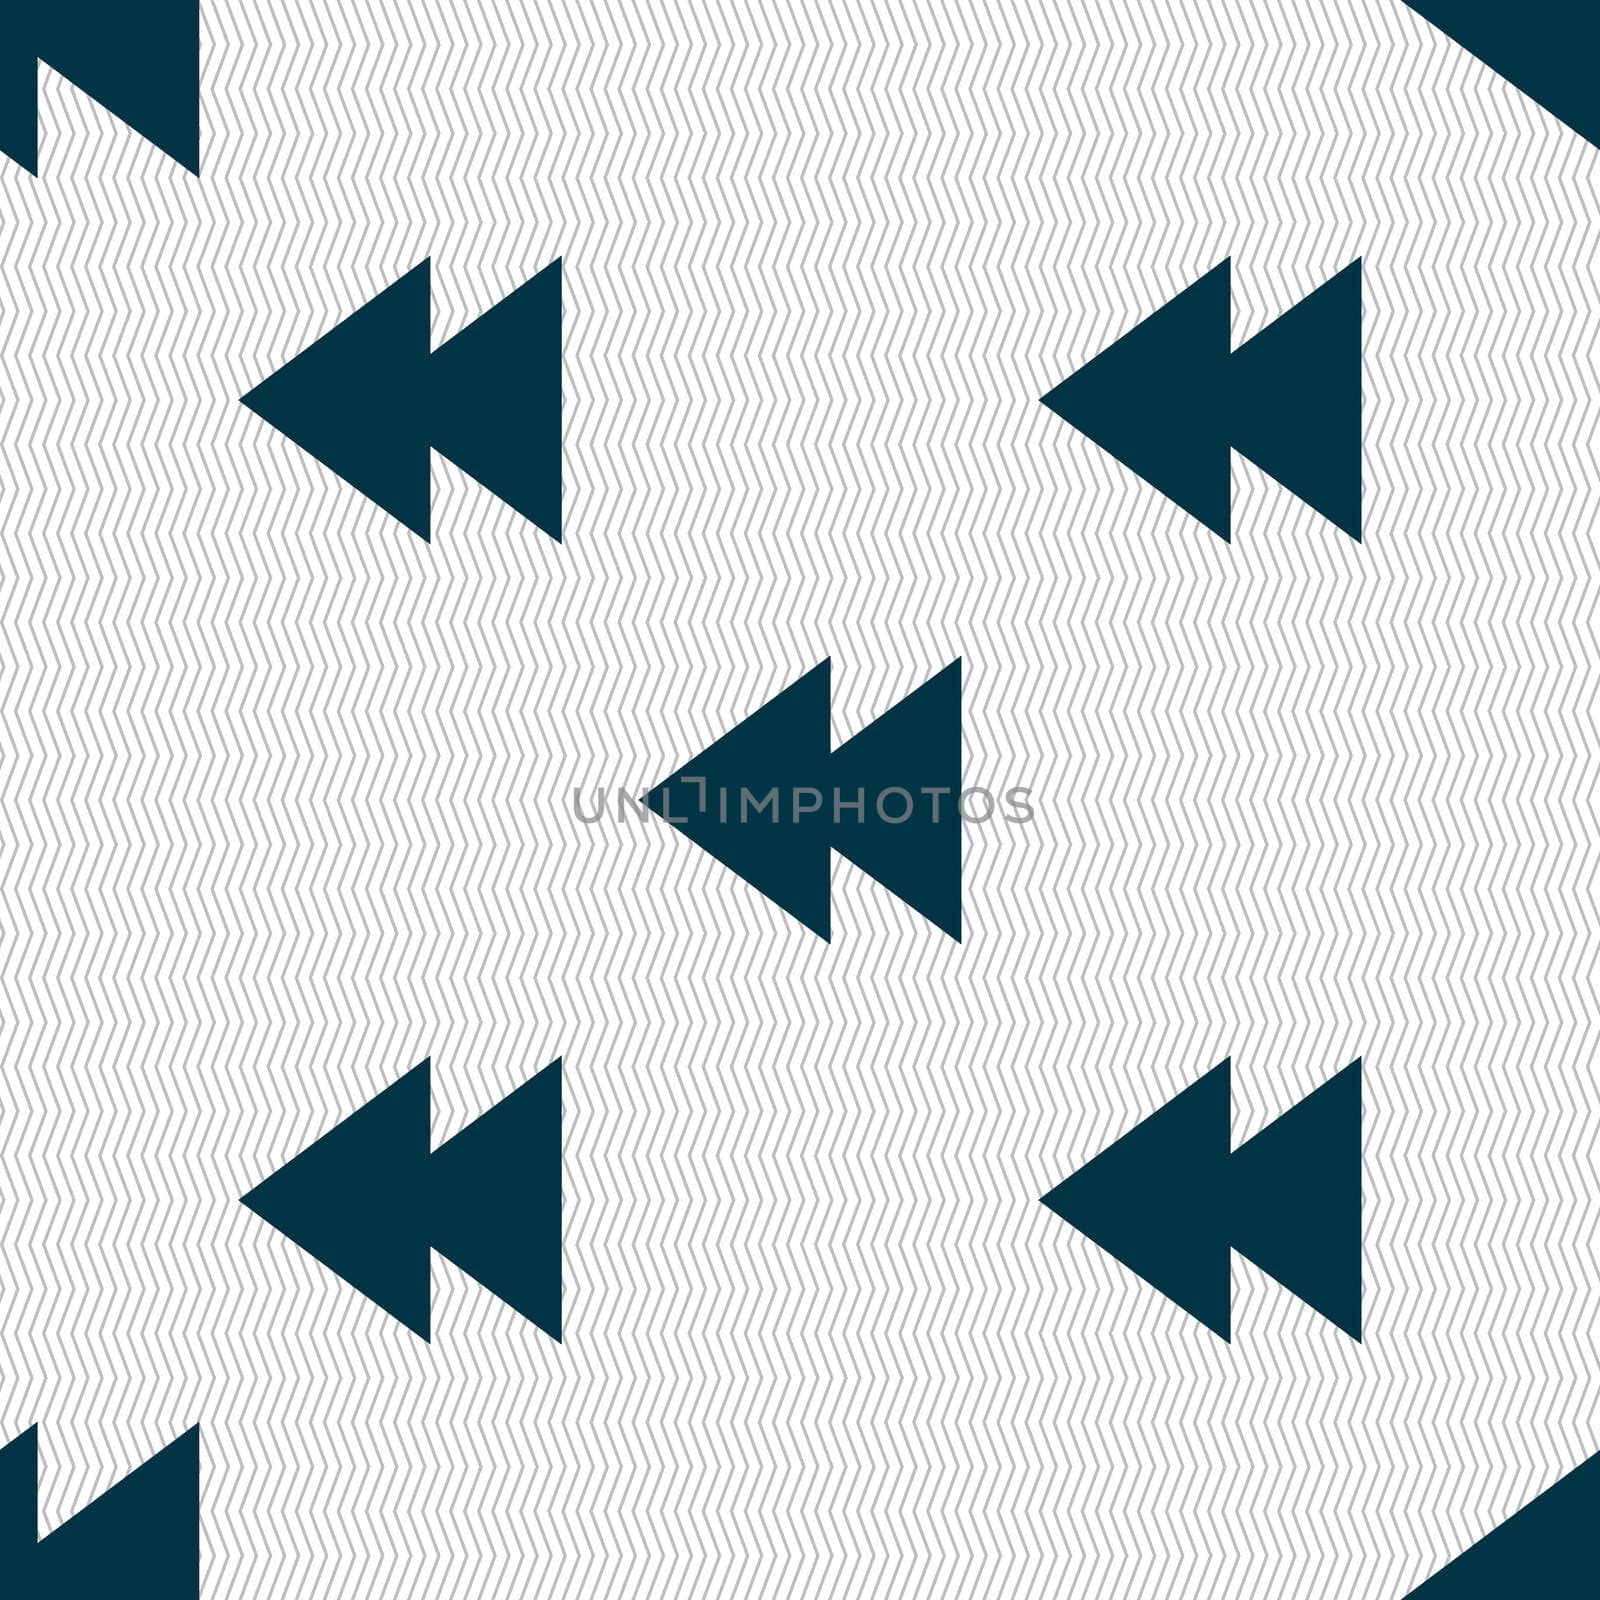 multimedia sign icon. Player navigation symbol. Seamless abstract background with geometric shapes.  by serhii_lohvyniuk